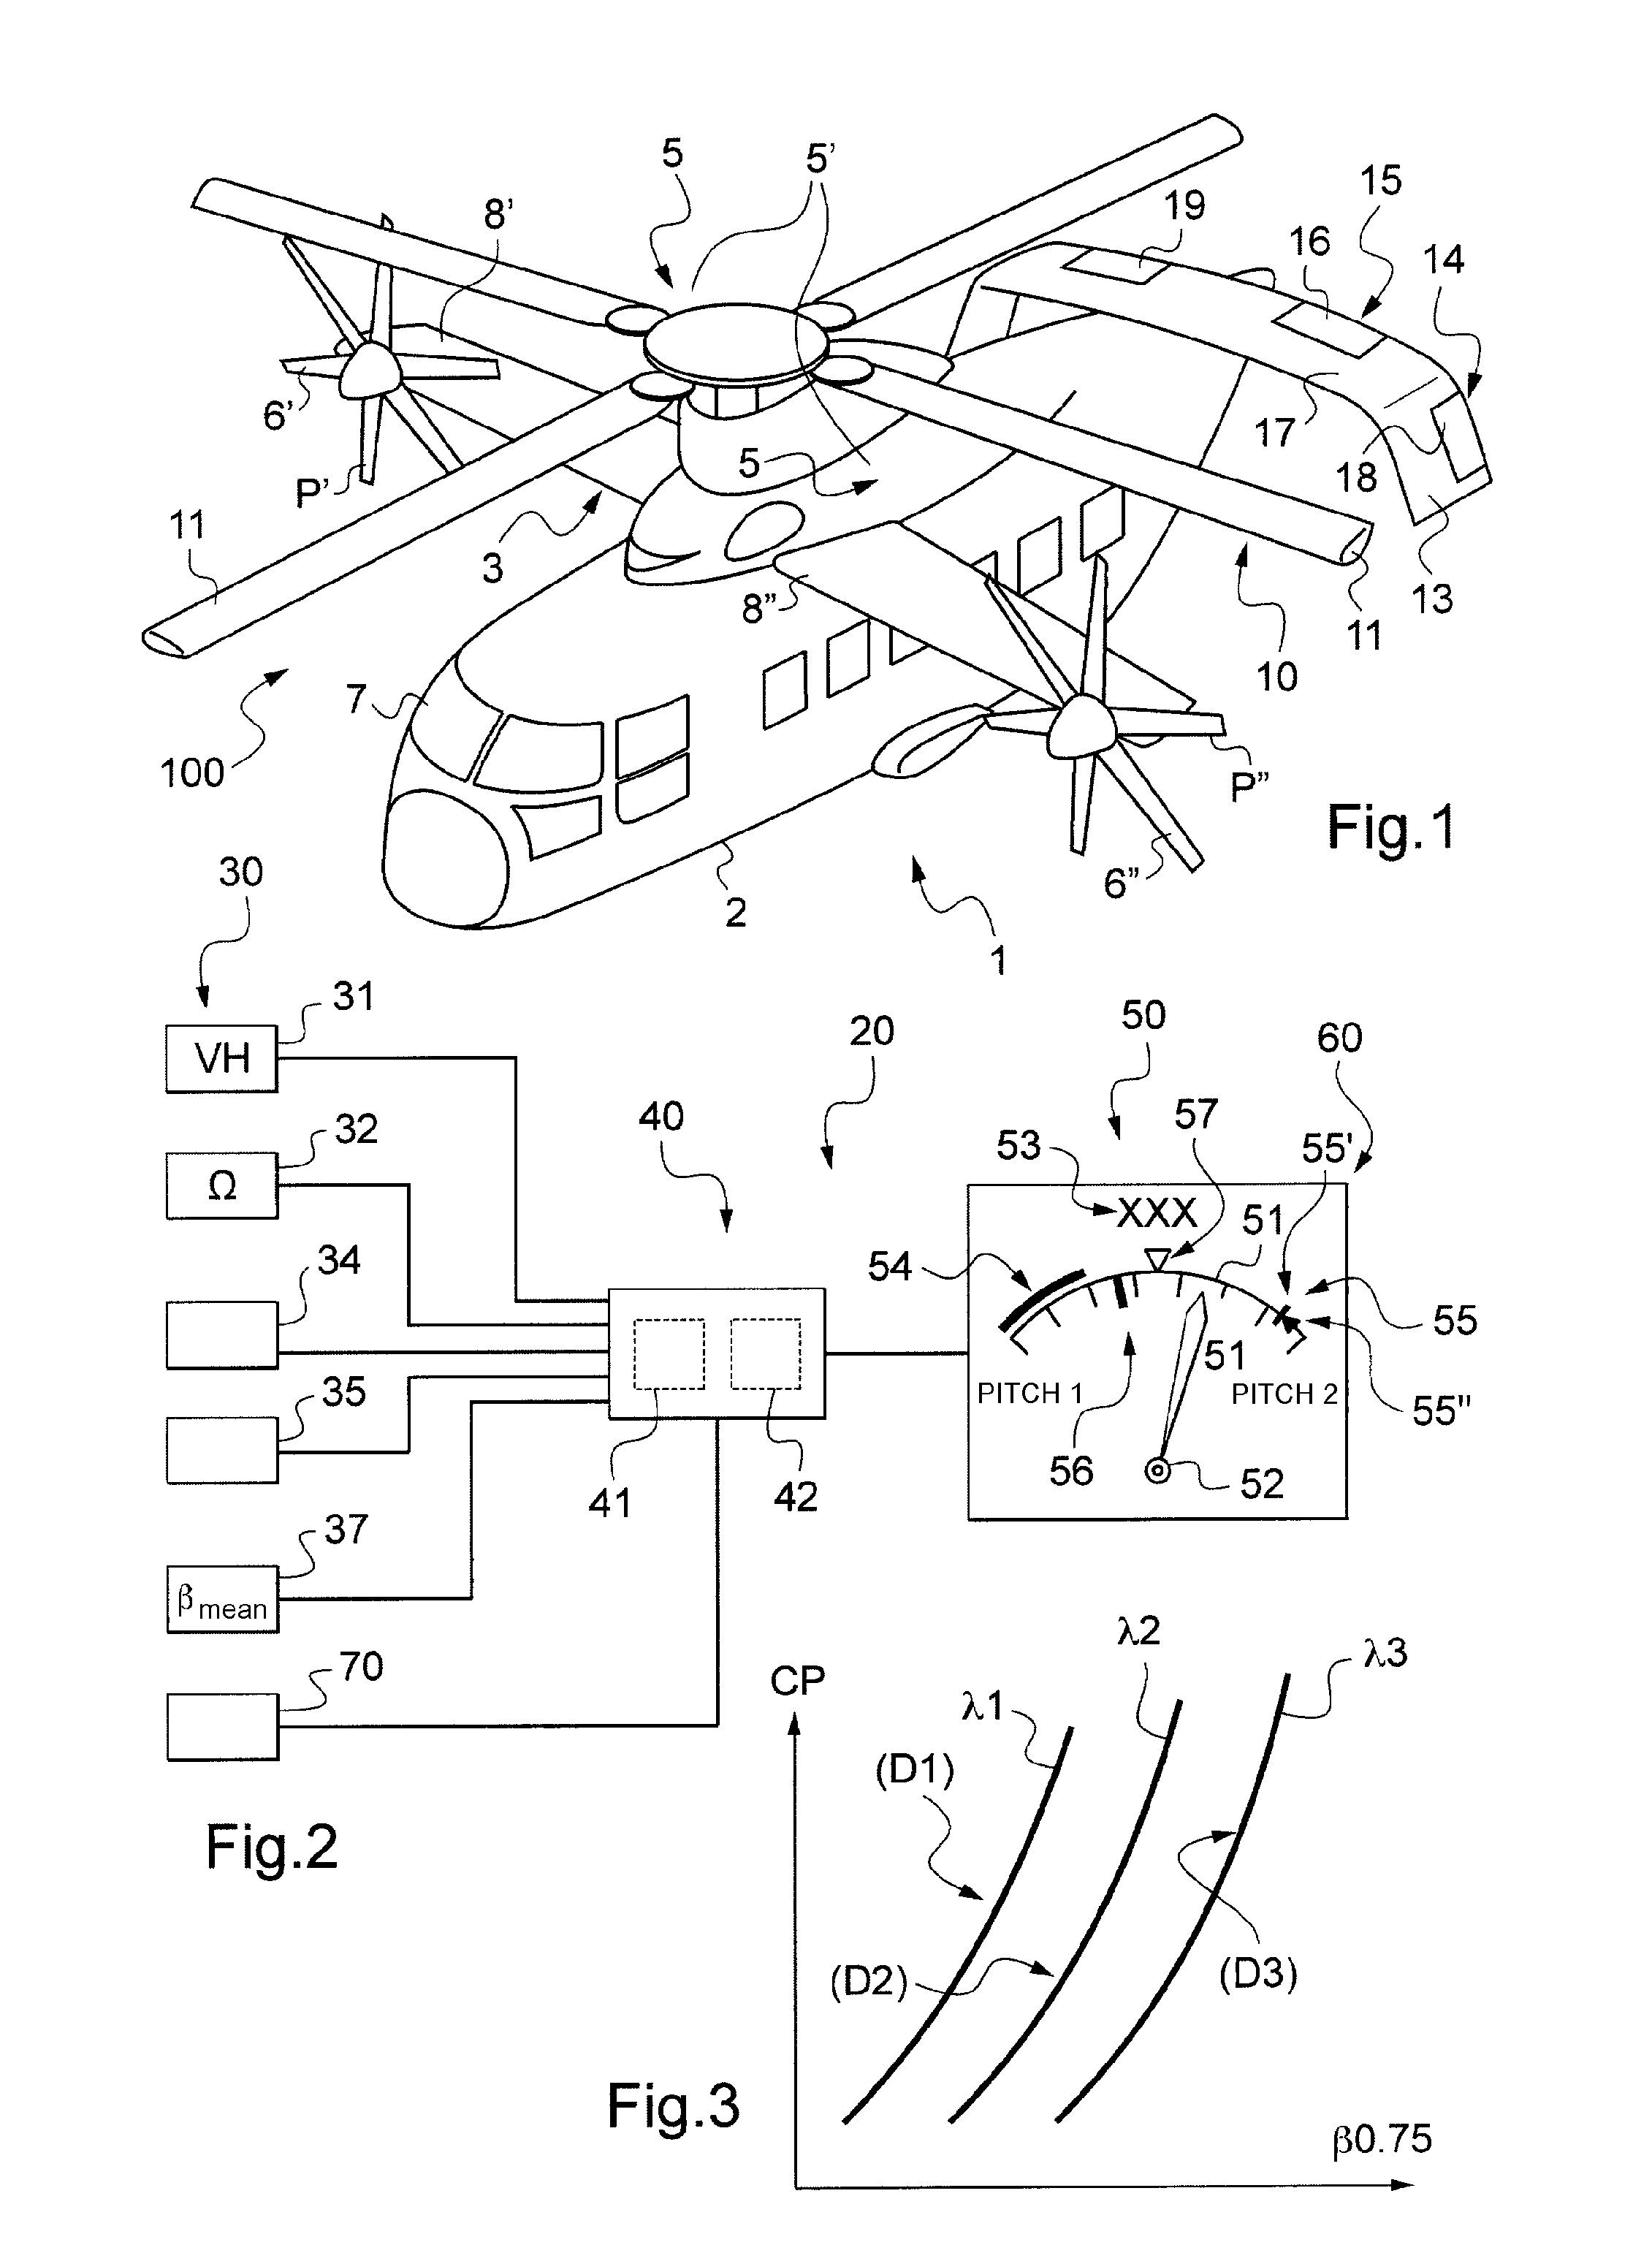 Device for assisting in piloting a hybrid helicopter, a hybrid helicopter provided with such a device, and a method implemented by said device